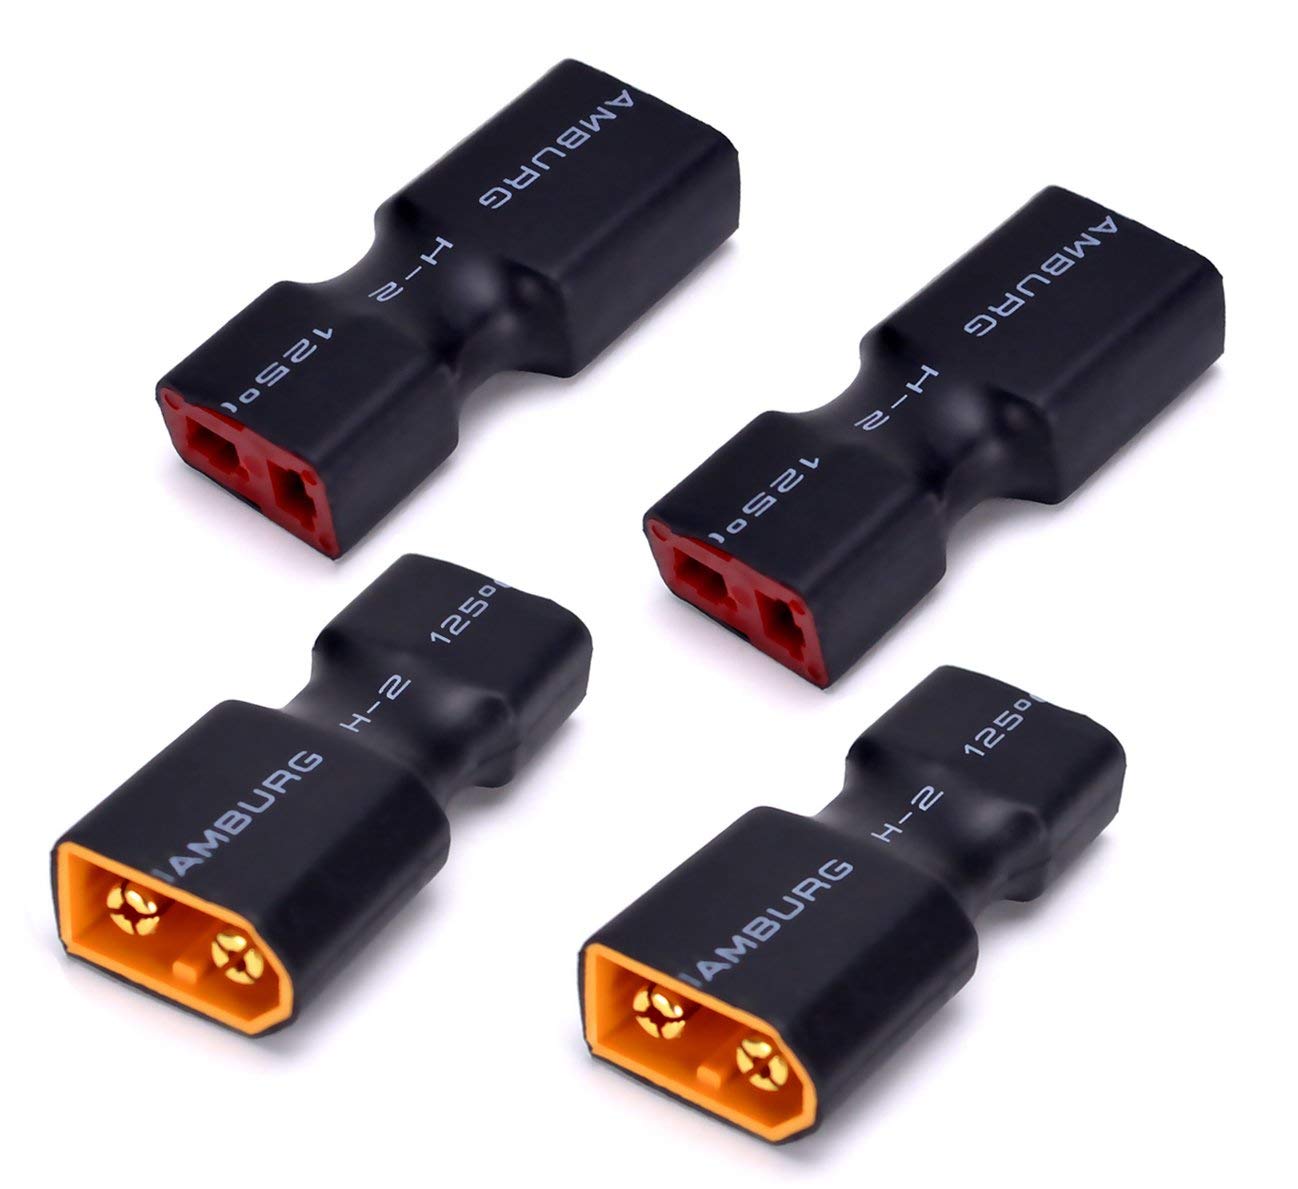 Details about  / 3pcs No Wires XT60 Male to T-Plug Female Connector Adapter Wireless